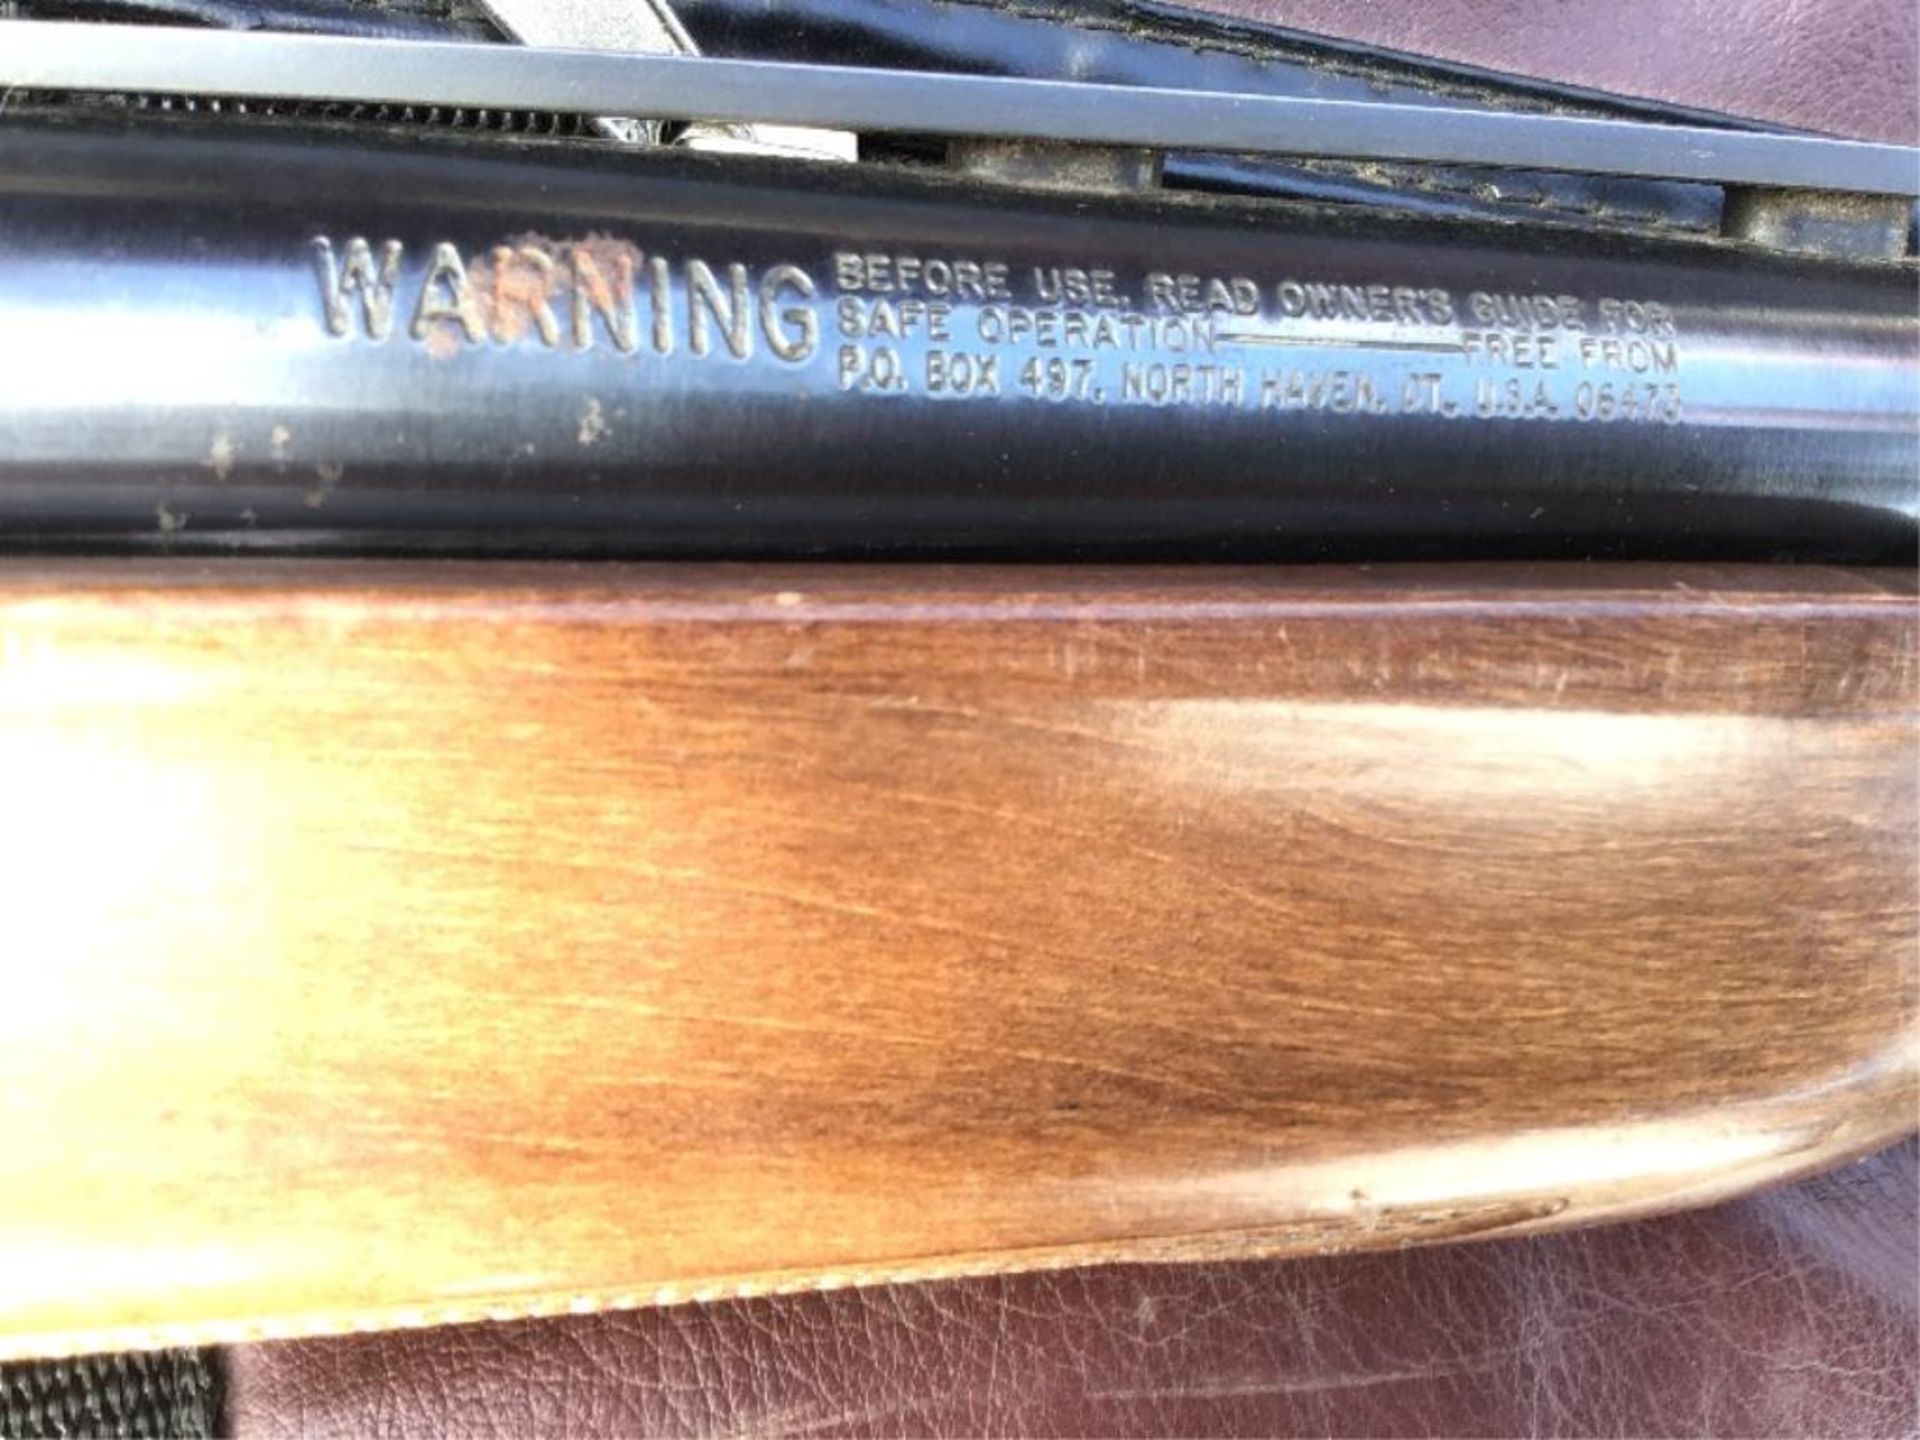 Mossberg 835 Ulti-Mag Pump Action Shotgun Chambered for 2 3/4, 3 & 3 1/2in Shells - Image 4 of 6